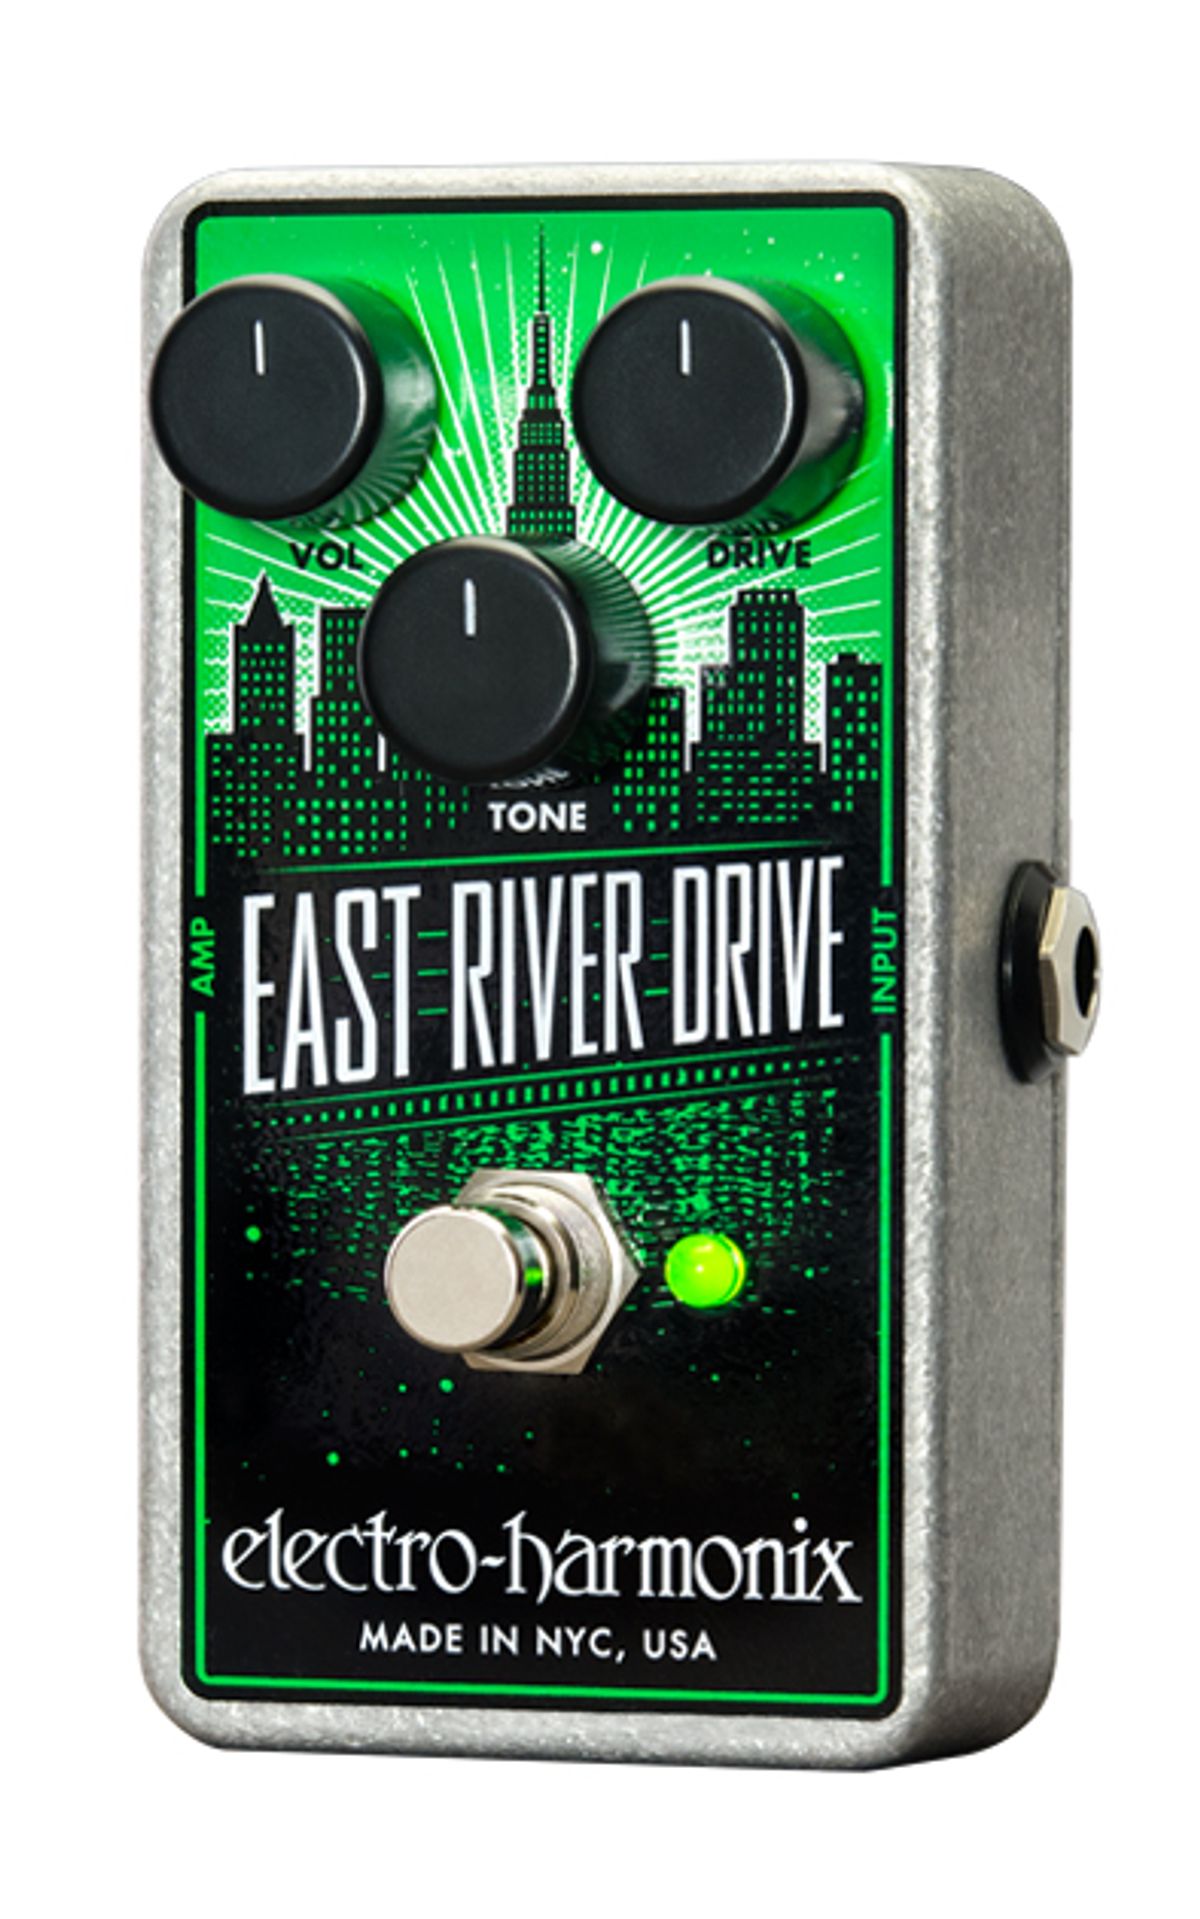 Electro-Harmonix Releases the East River Drive